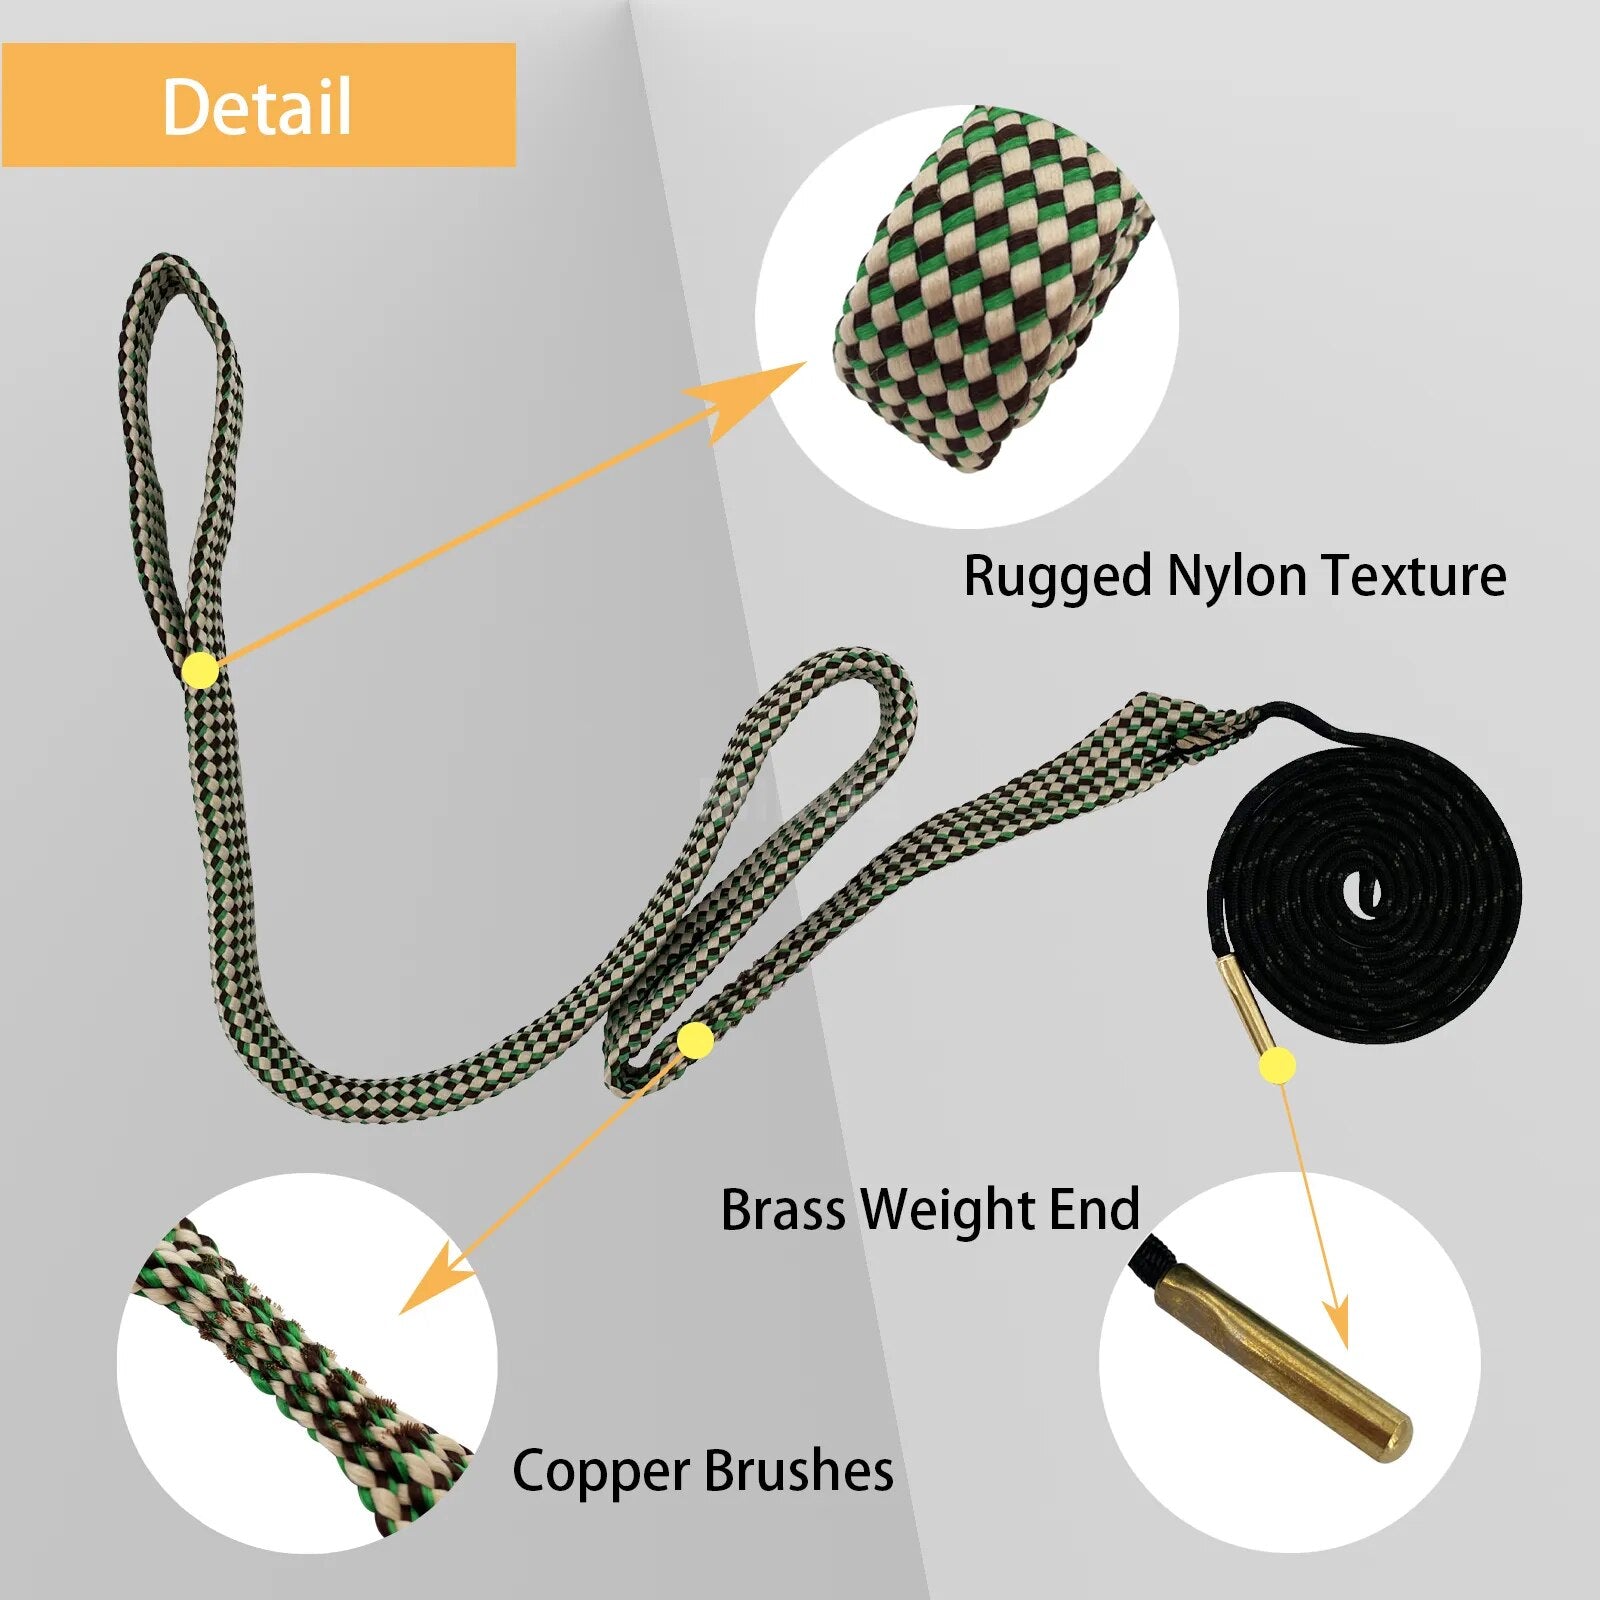 MIDUG barrel Cleaning rope for 7.62, .308, 30-30, 30-06, .300, .303, 7.62